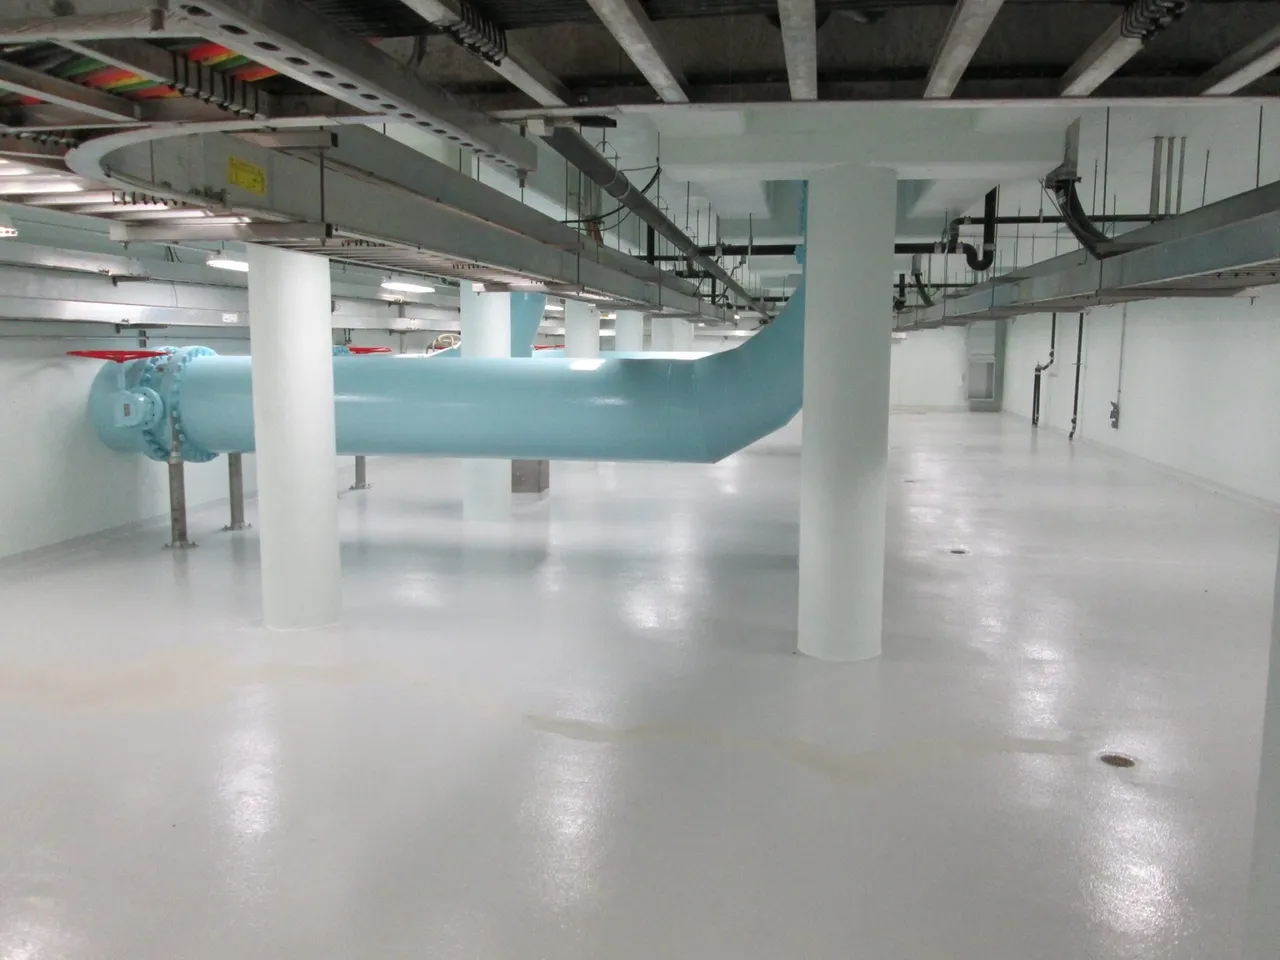 A large room with white floors and blue pipes.